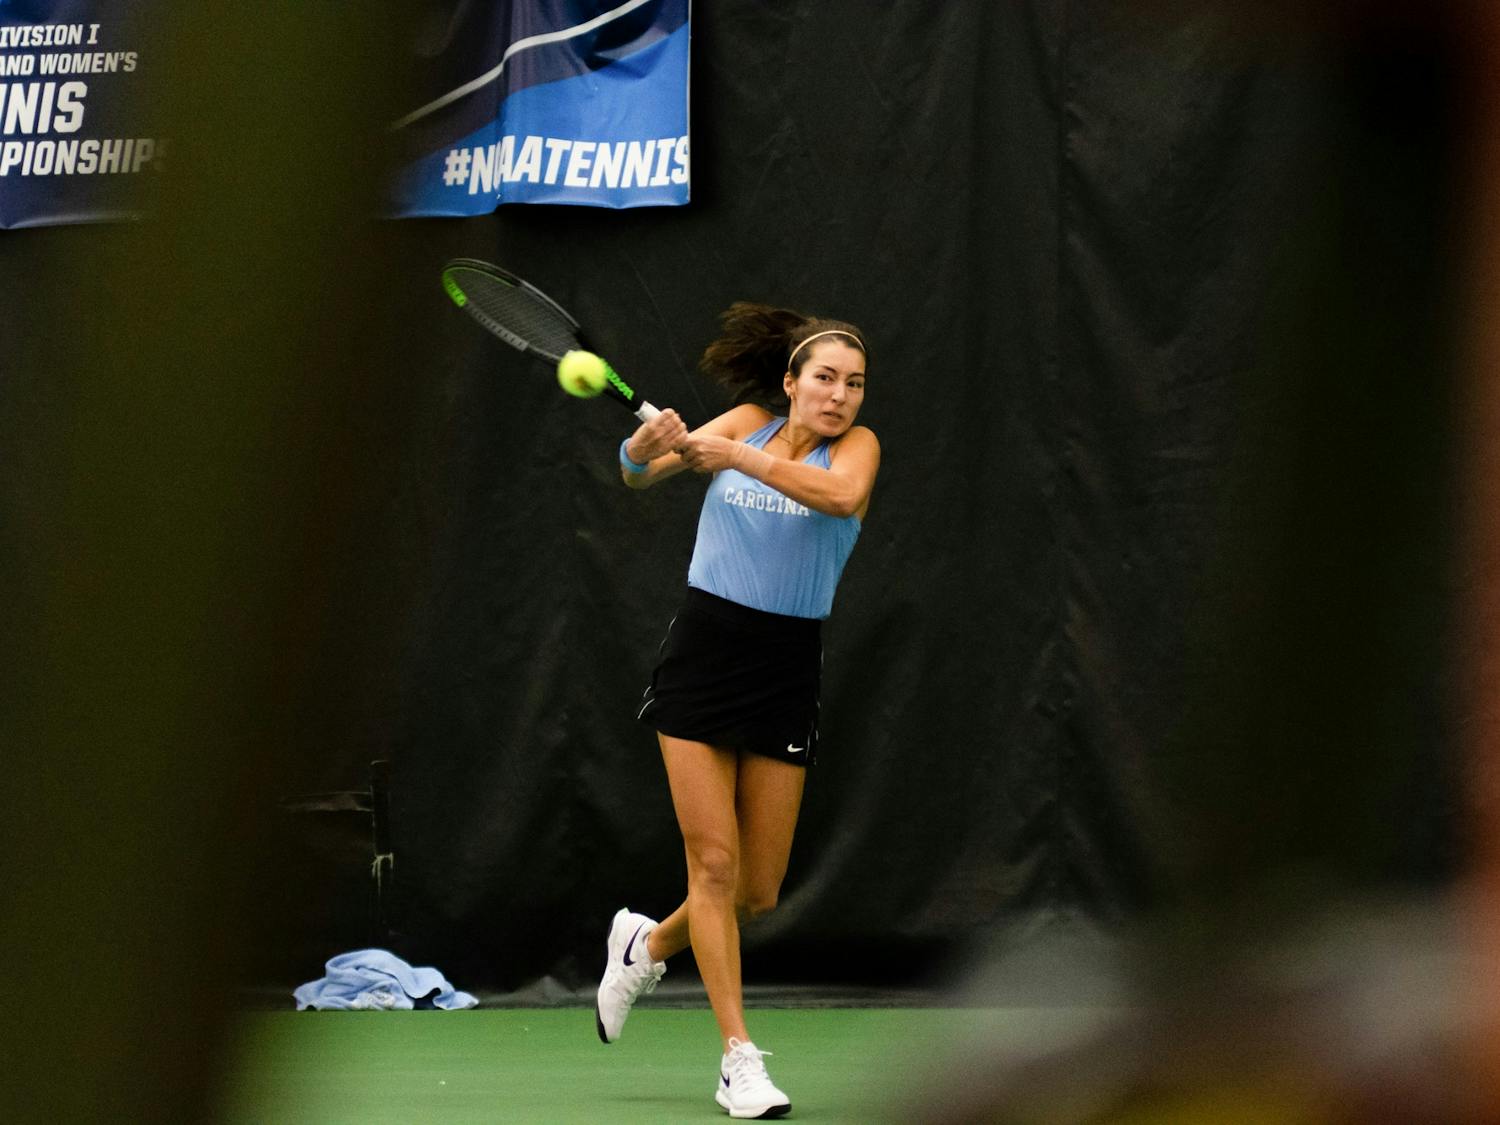 Reilly Tran hits the ball during her singles match against Elon University's Victoria Saldh on Saturday, Jan. 15, 2022, in Chapel Hill, NC.